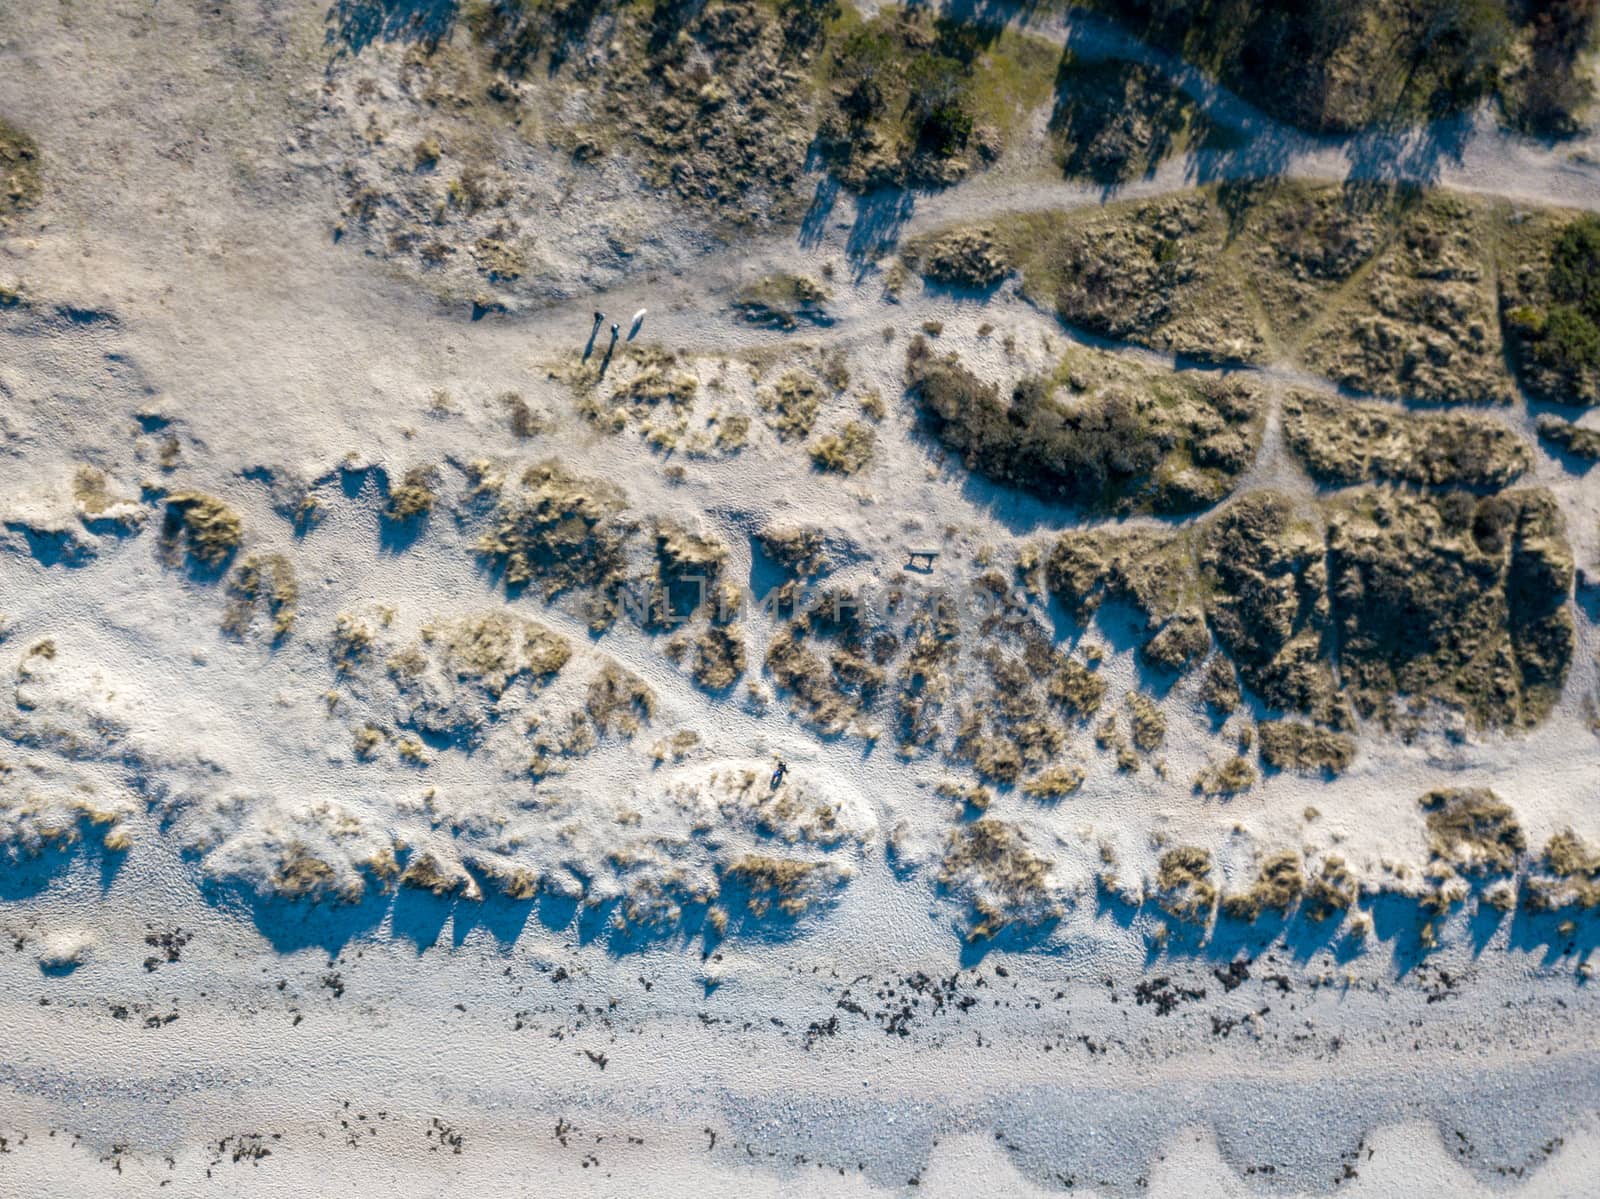 Tisvildeleje, Denmark - February 24, 2019: Aerial drone  view of the coastline beach, sand dunes and forest.